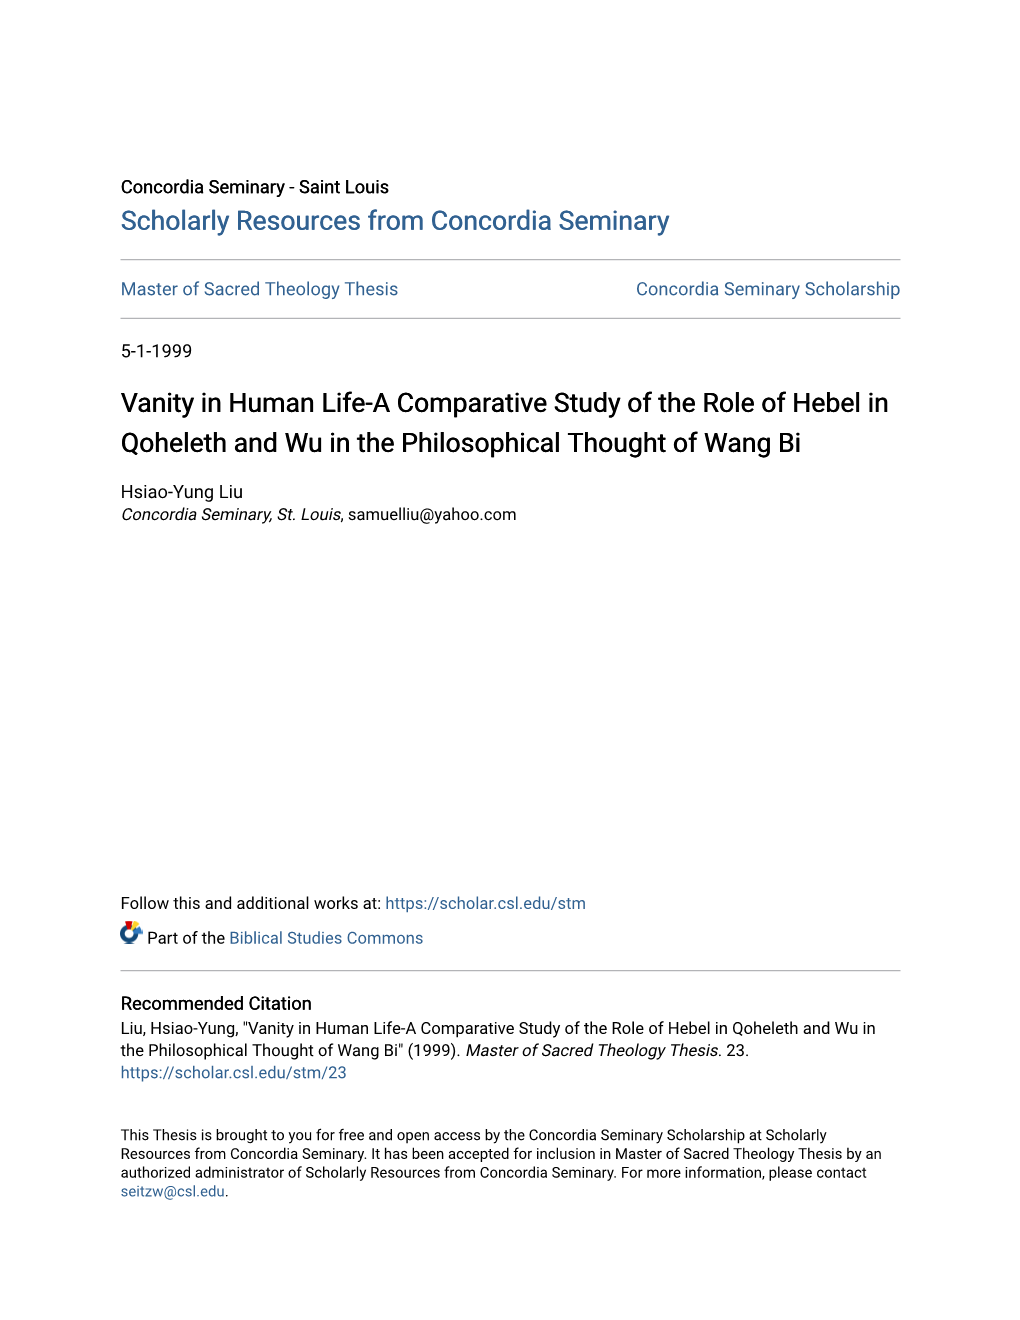 Vanity in Human Life-A Comparative Study of the Role of Hebel in Qoheleth and Wu in the Philosophical Thought of Wang Bi